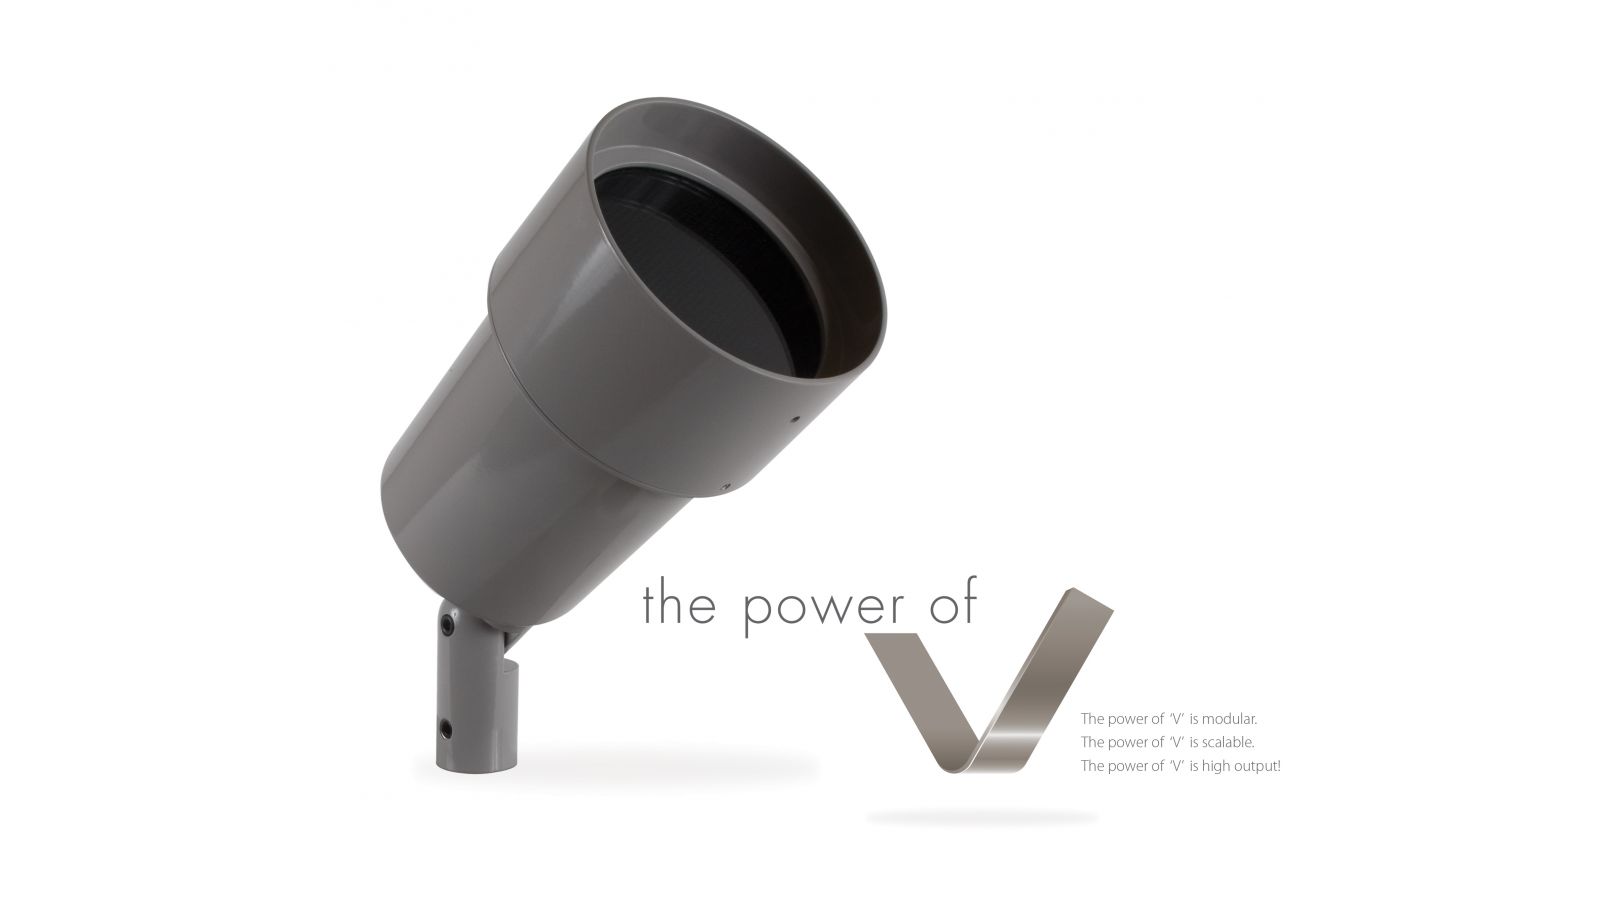 The K2 Series Floodlight with Power of V